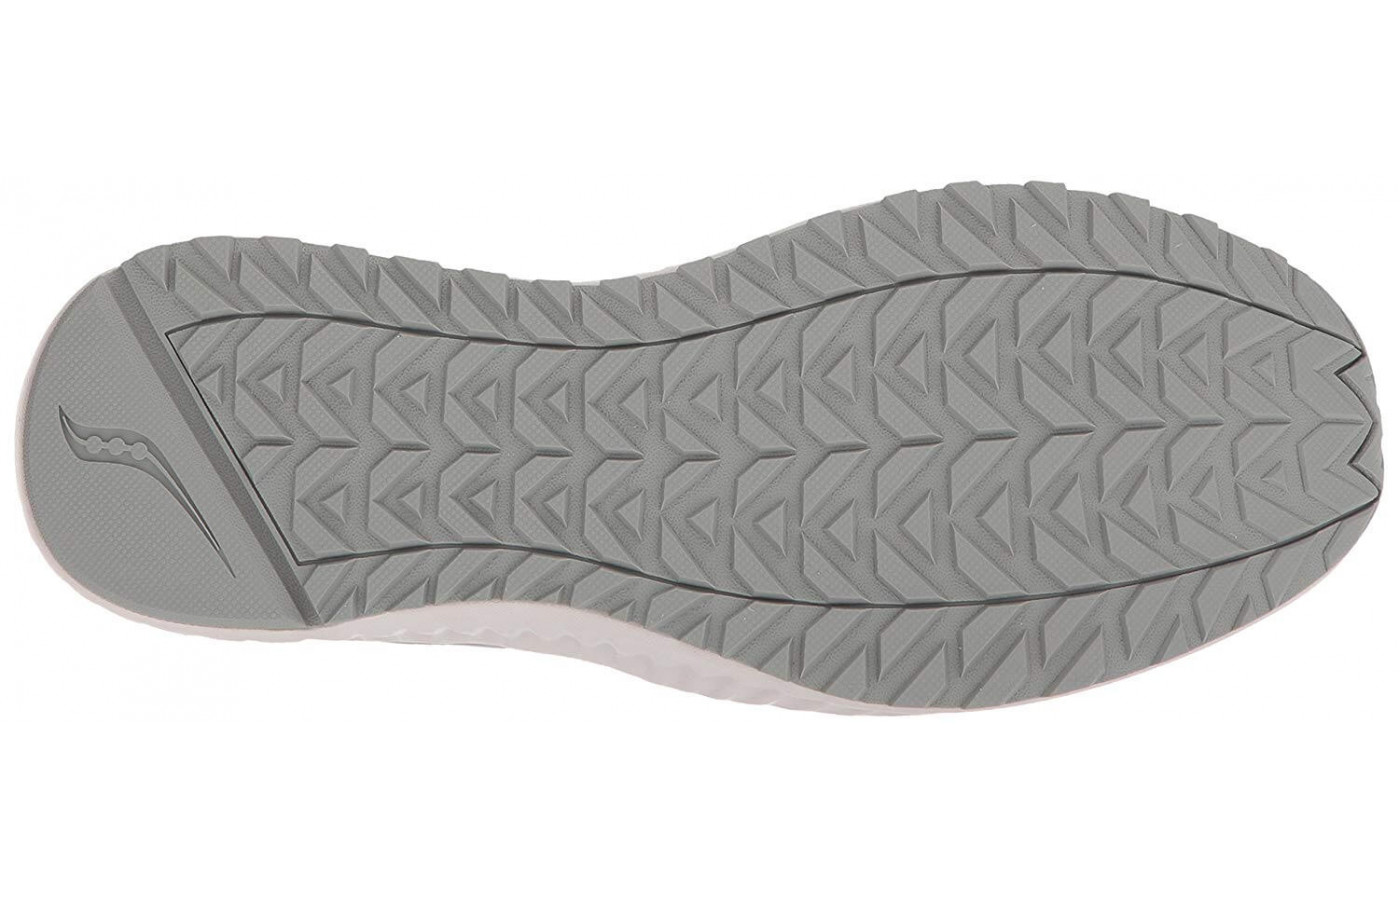 A durable rubber compound is used for the Stretch & Go Breeze's outsole